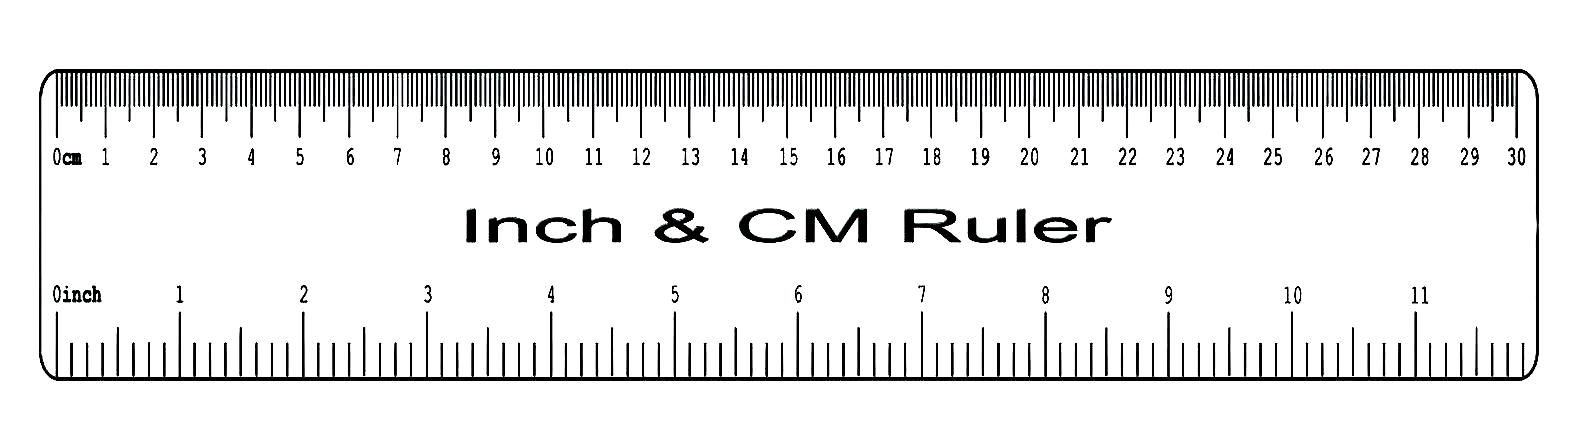 Online Ruler Actual Size